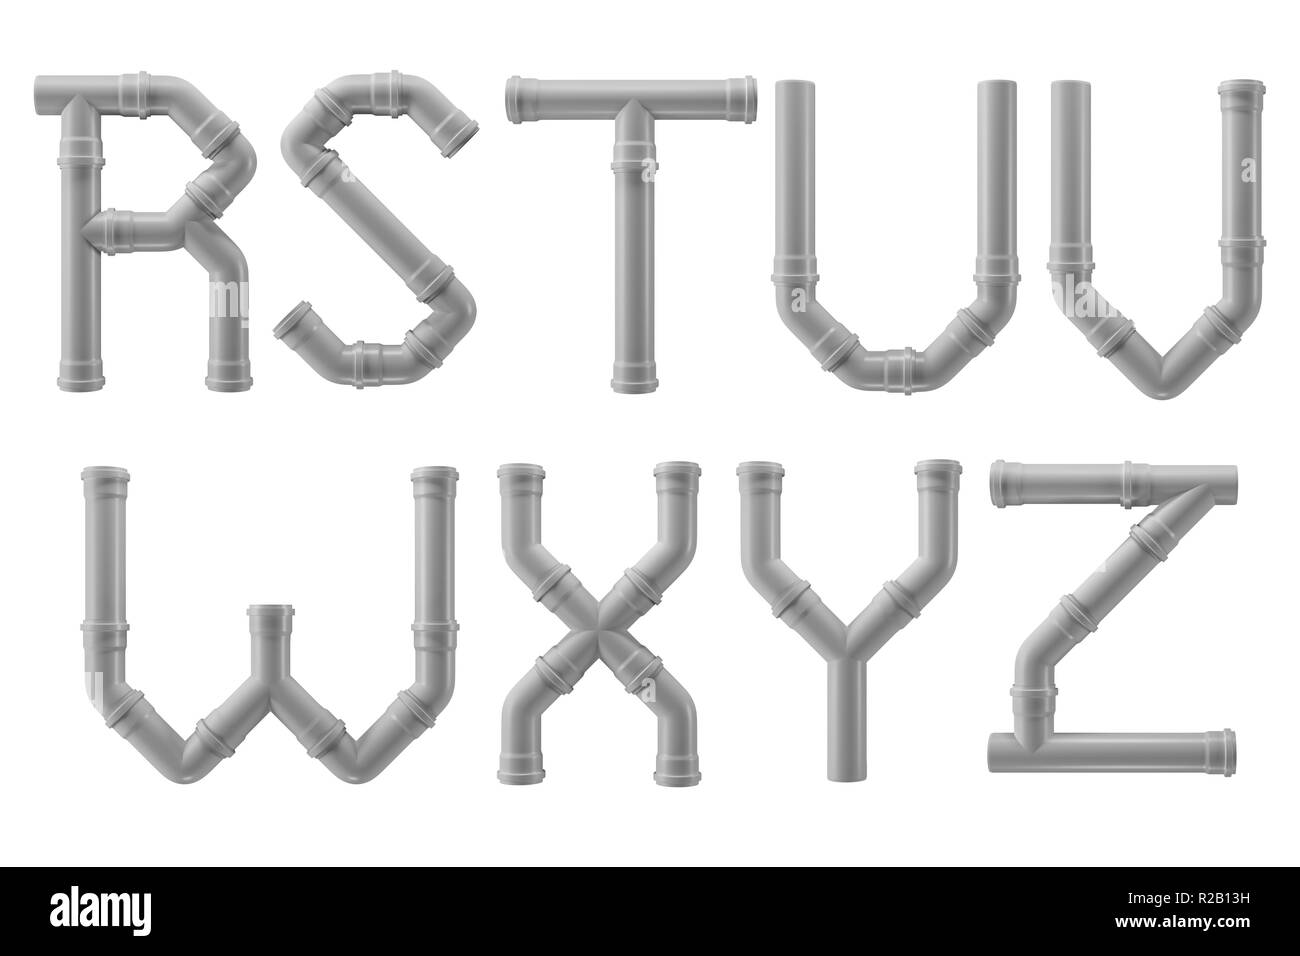 PVC alphabet made of PVC piping elements - Letters R to Z Stock Photo